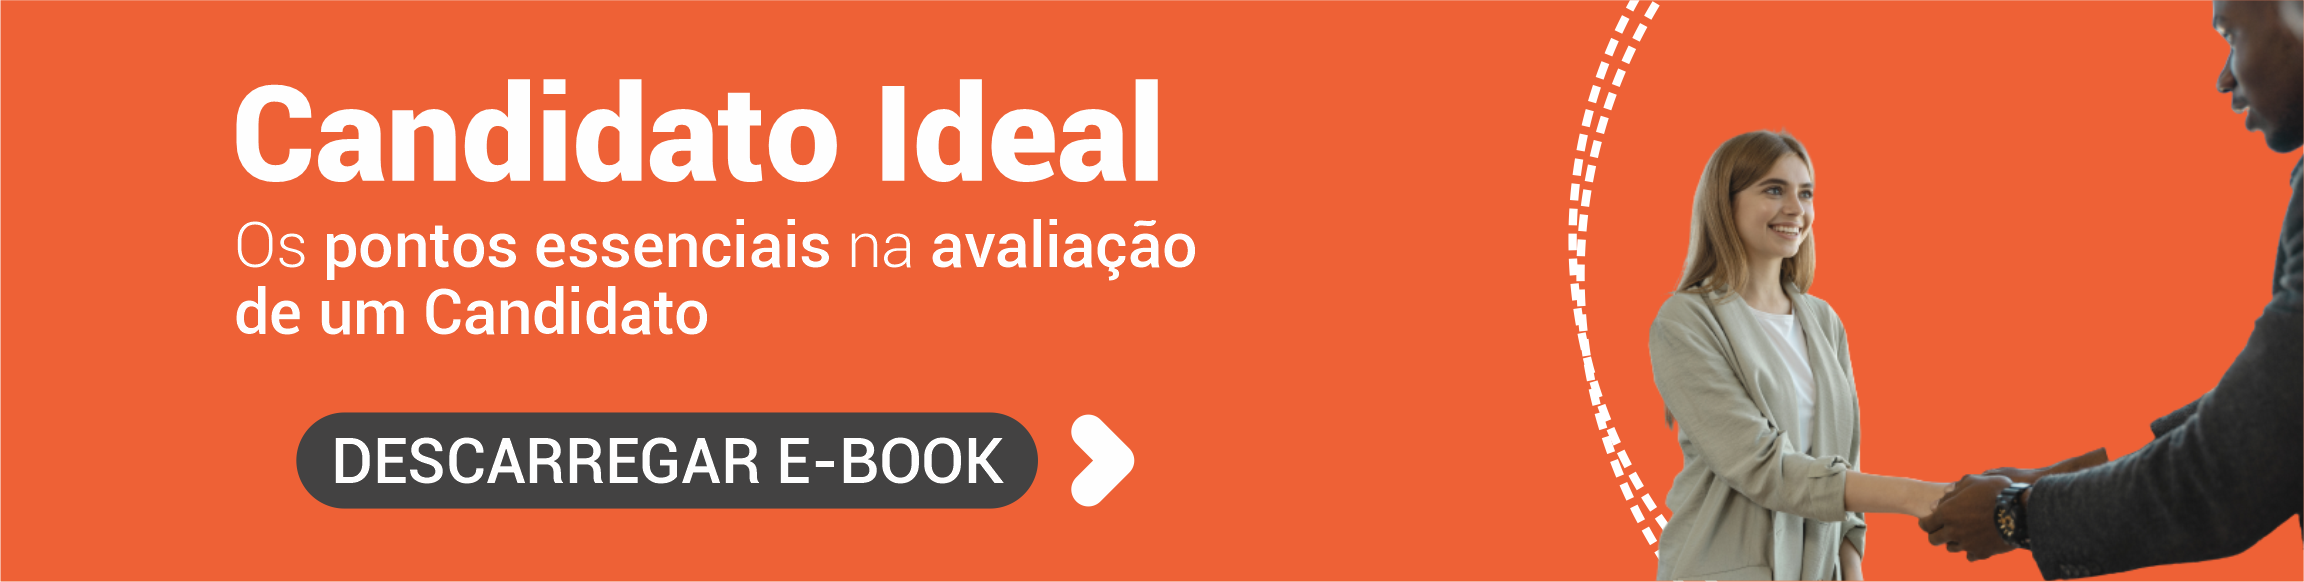 banner download e-book candidato ideal